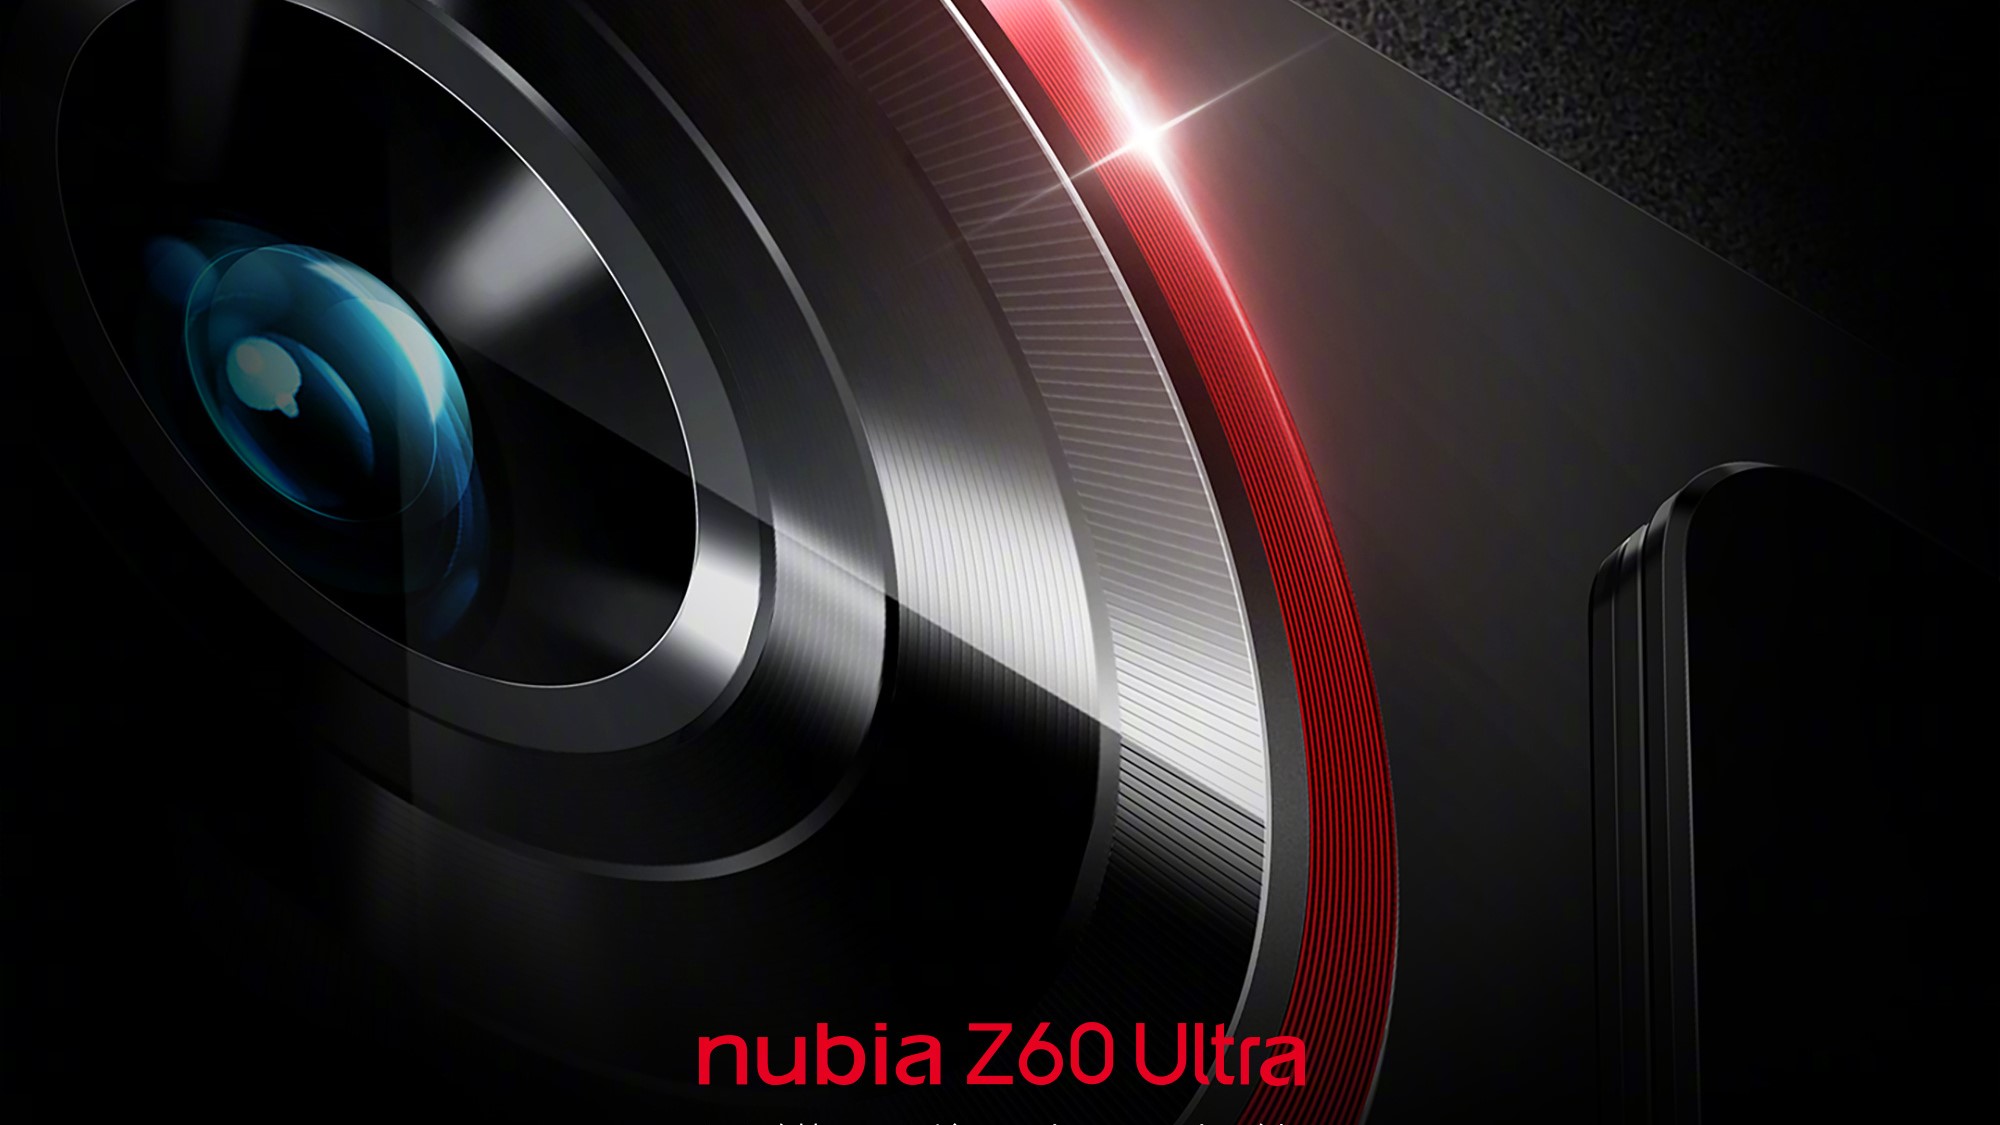 ZTE Nubia Z60 Ultra Review: specs and features, camera quality test, gaming  benchmark, user opinions and photos